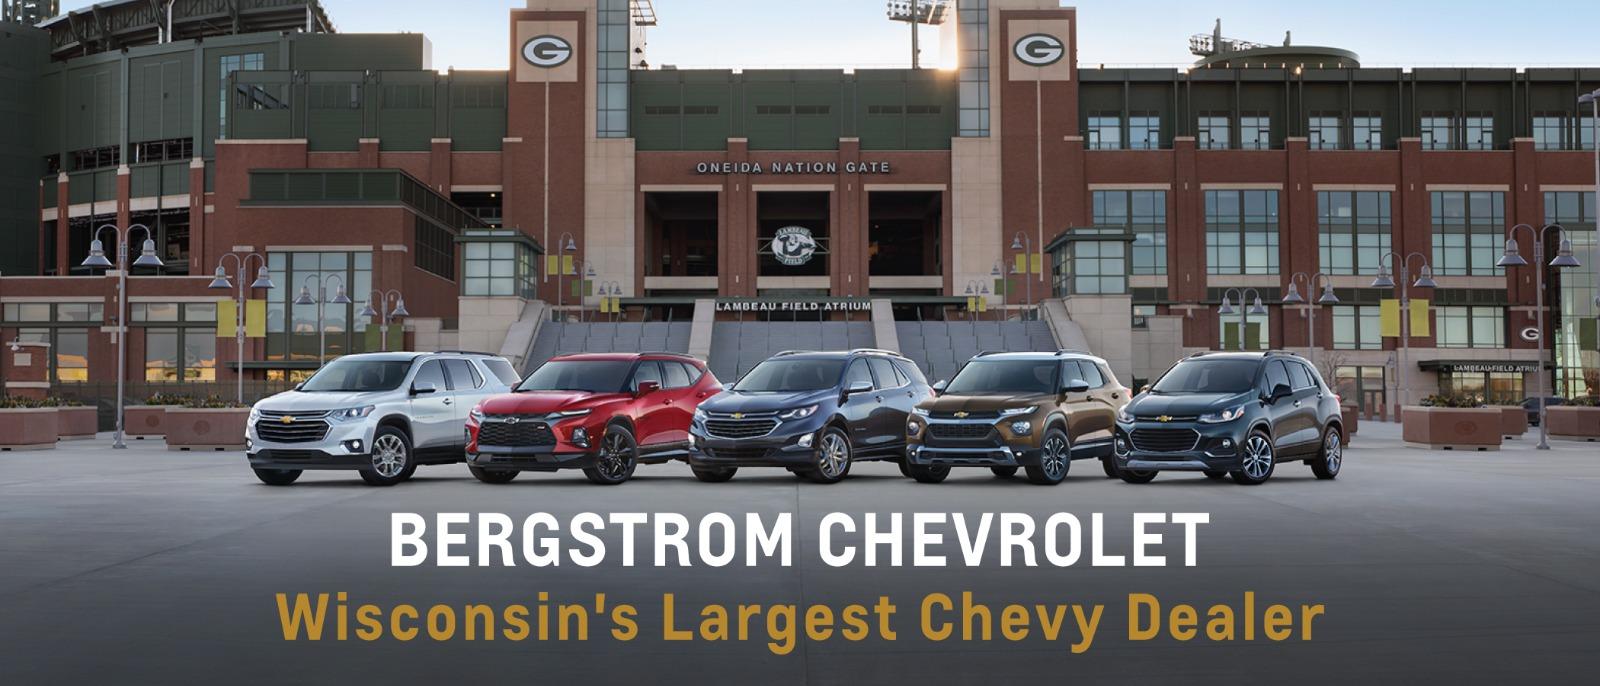 Wisconsin's Largest Chevy Dealer